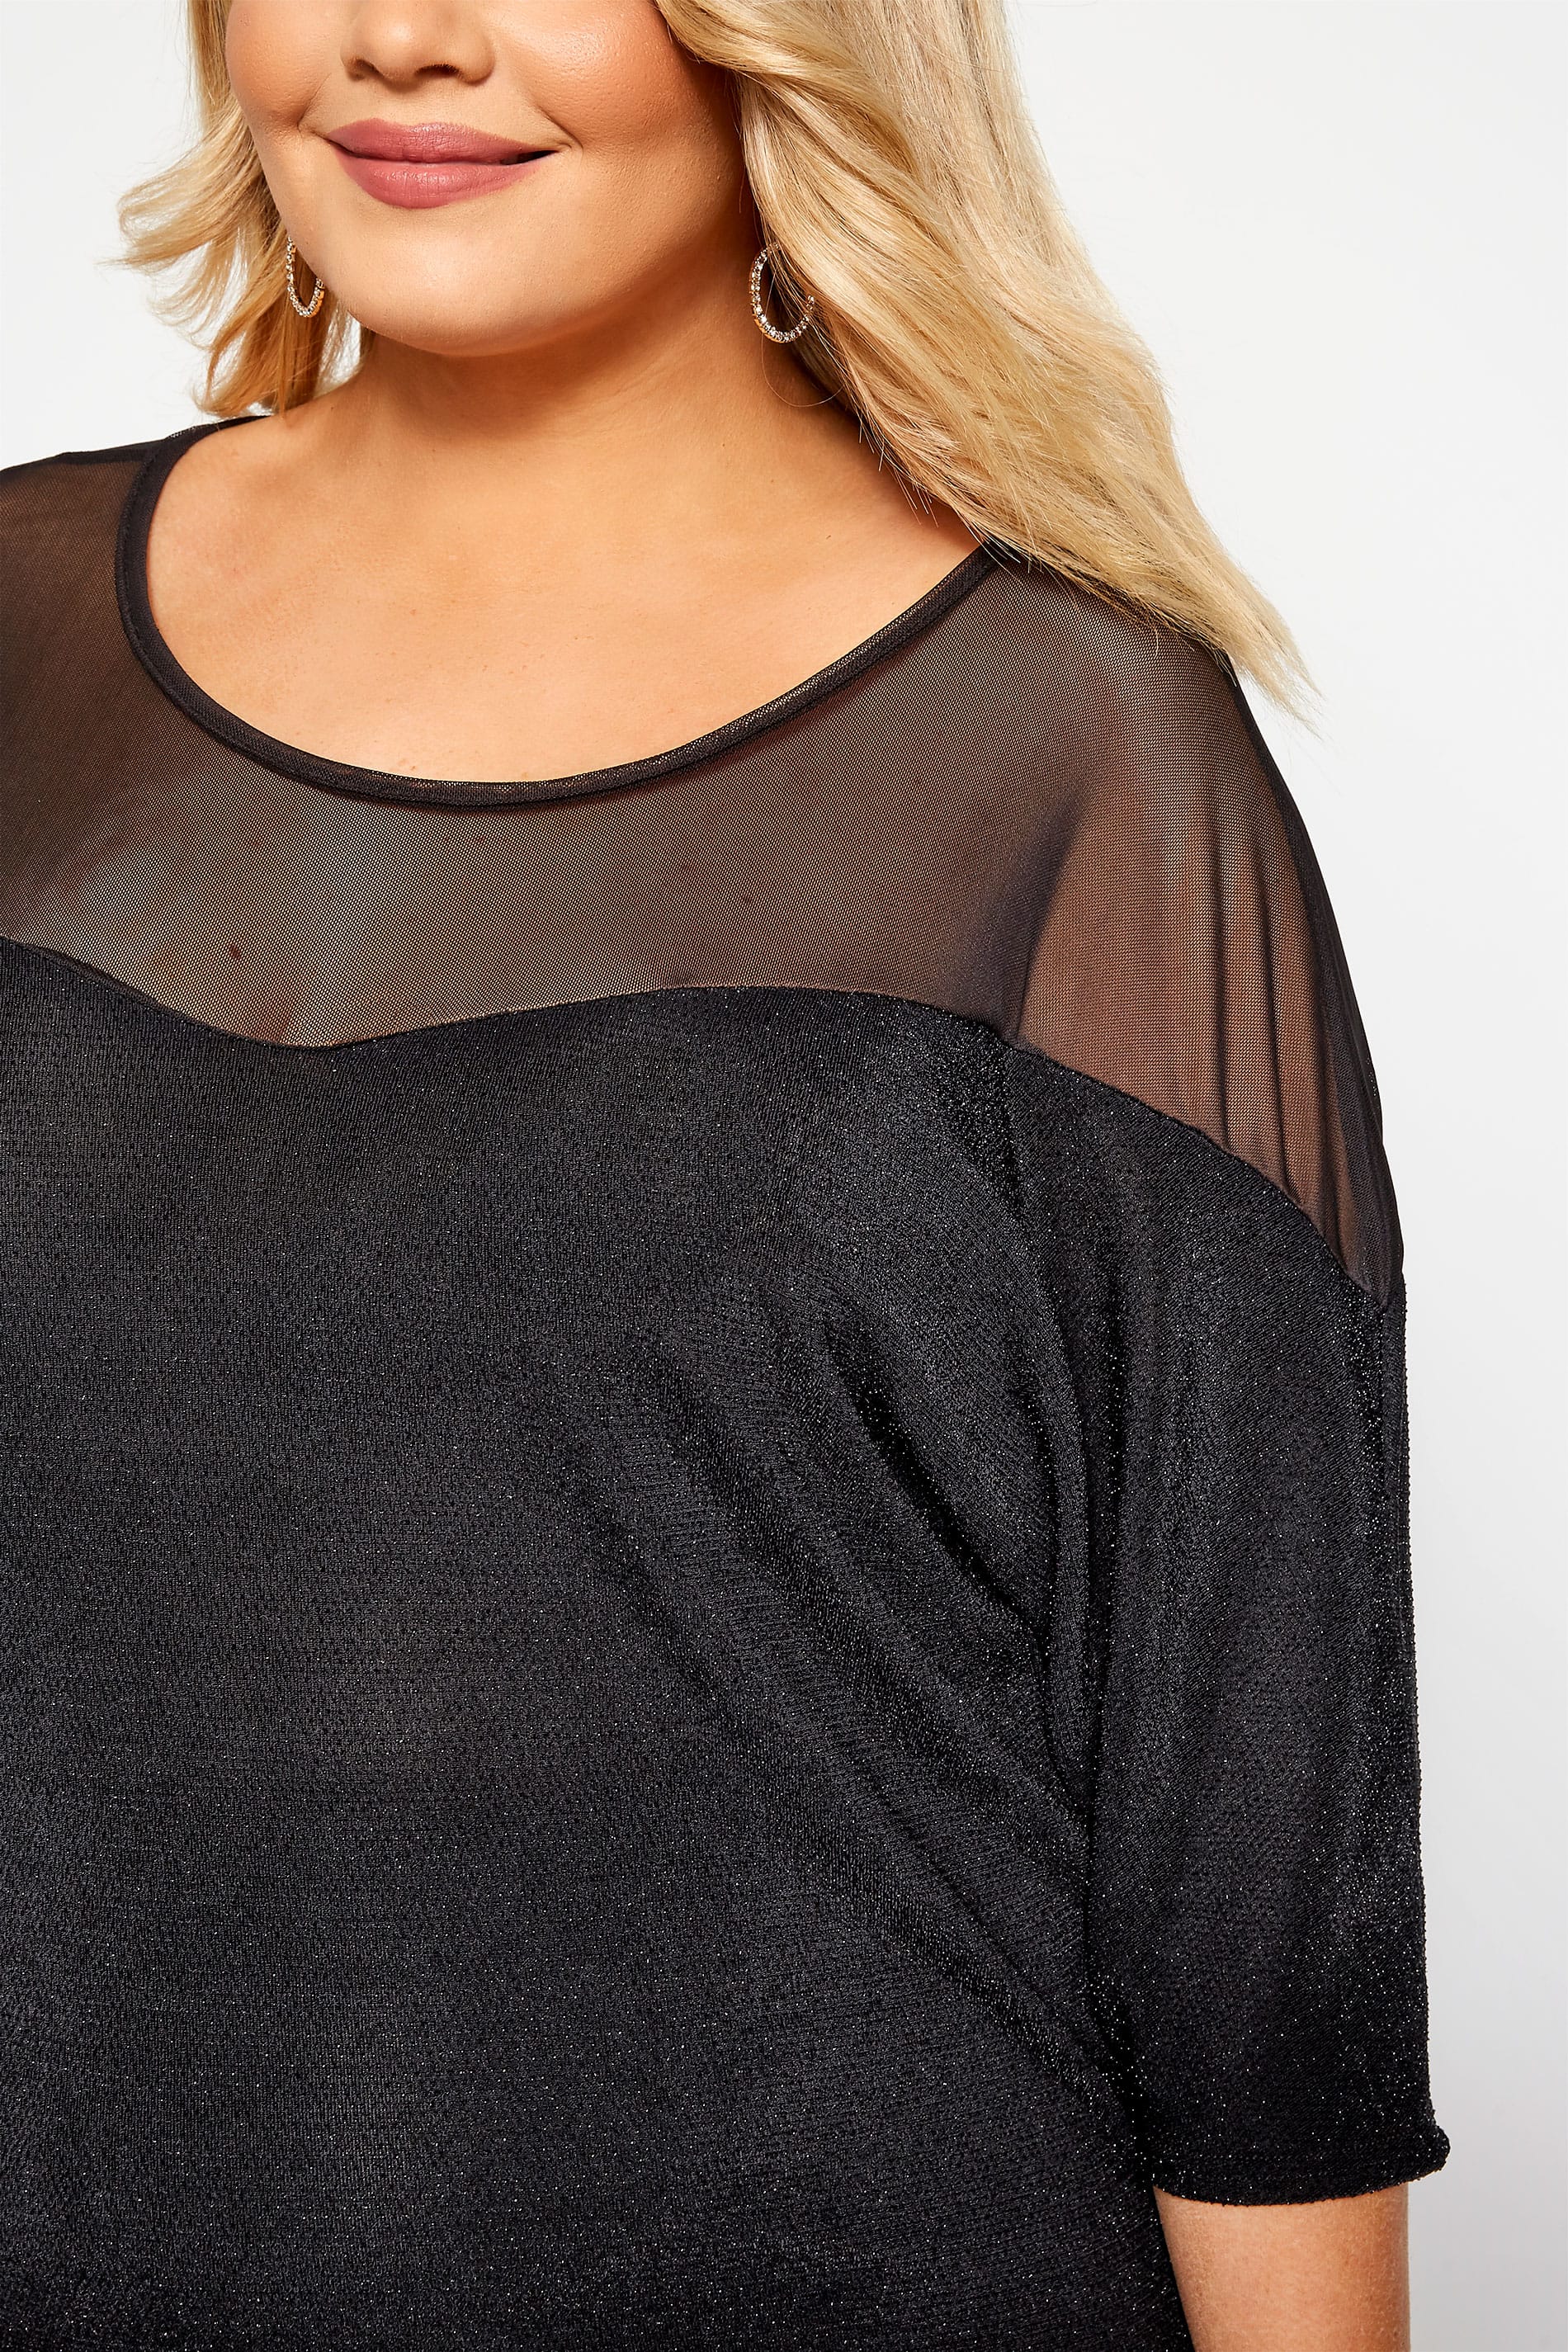 Black Sparkle Mesh Top | Yours Clothing